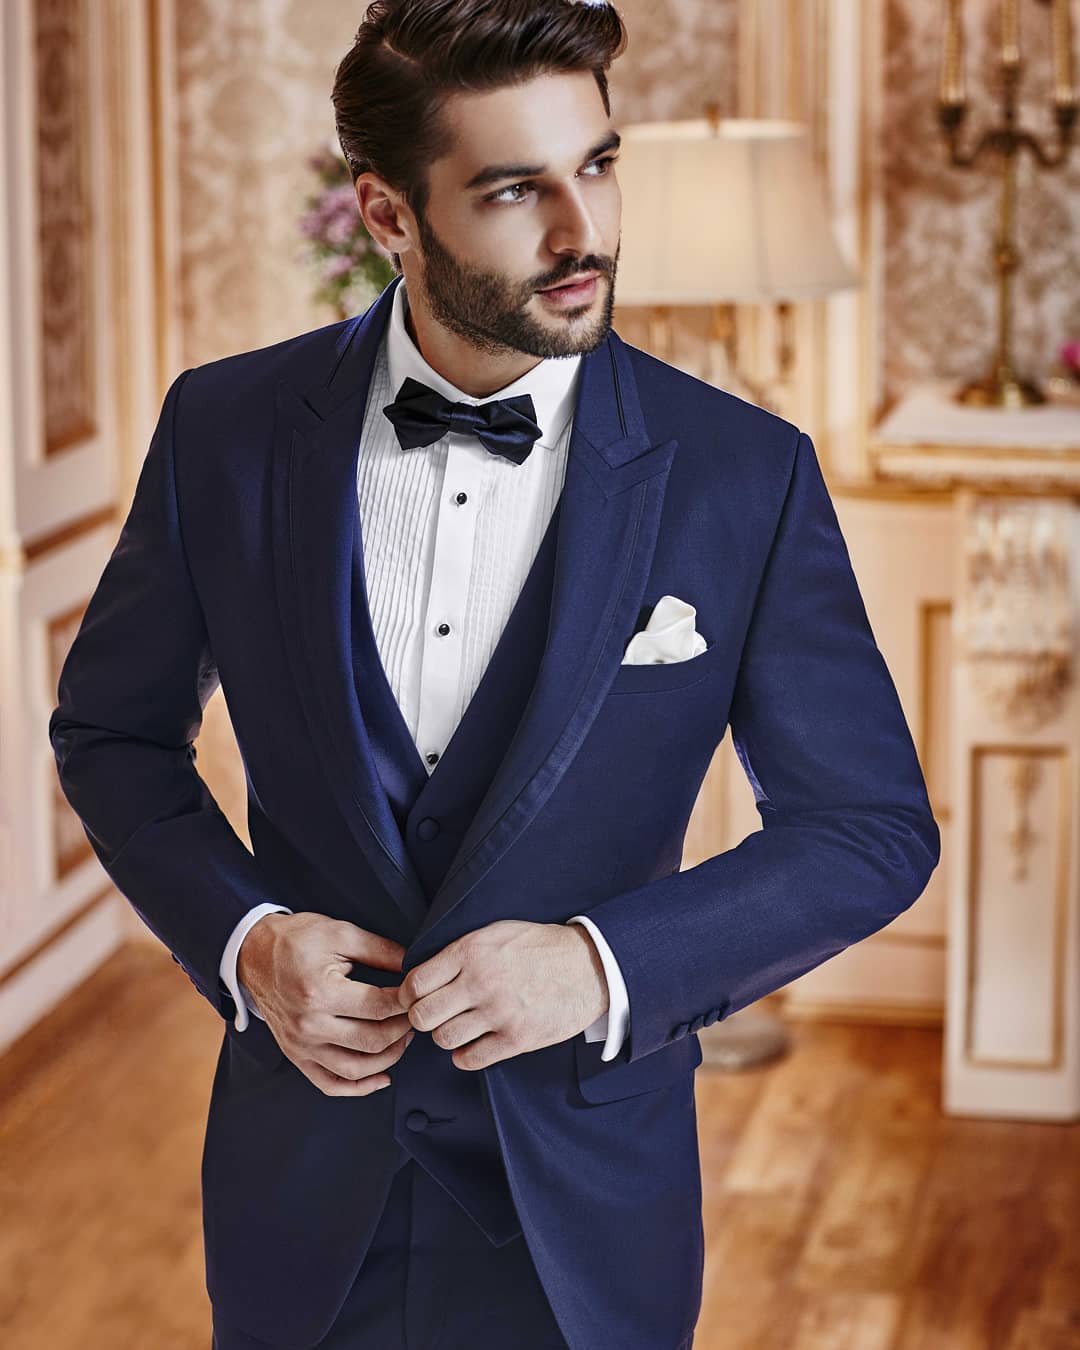 Romancing a Three-Piece Suit with a very smart bow-tie, rich fabric and intricate detailing. How about creating a statement with this bold and blue look? Click on the link in bio to check more dapper outfits. .
.
.
.
.
.
.
.
.
.
.
.
#fashioningpossibilities #madetofit #madetowear #tailormade #fashionclothes #menswear #mensfashion #mensstyle #mensoutfit #fashionformen #suitup #suited #suitstyle #tailoredsuit #finefabric #thearvindstore